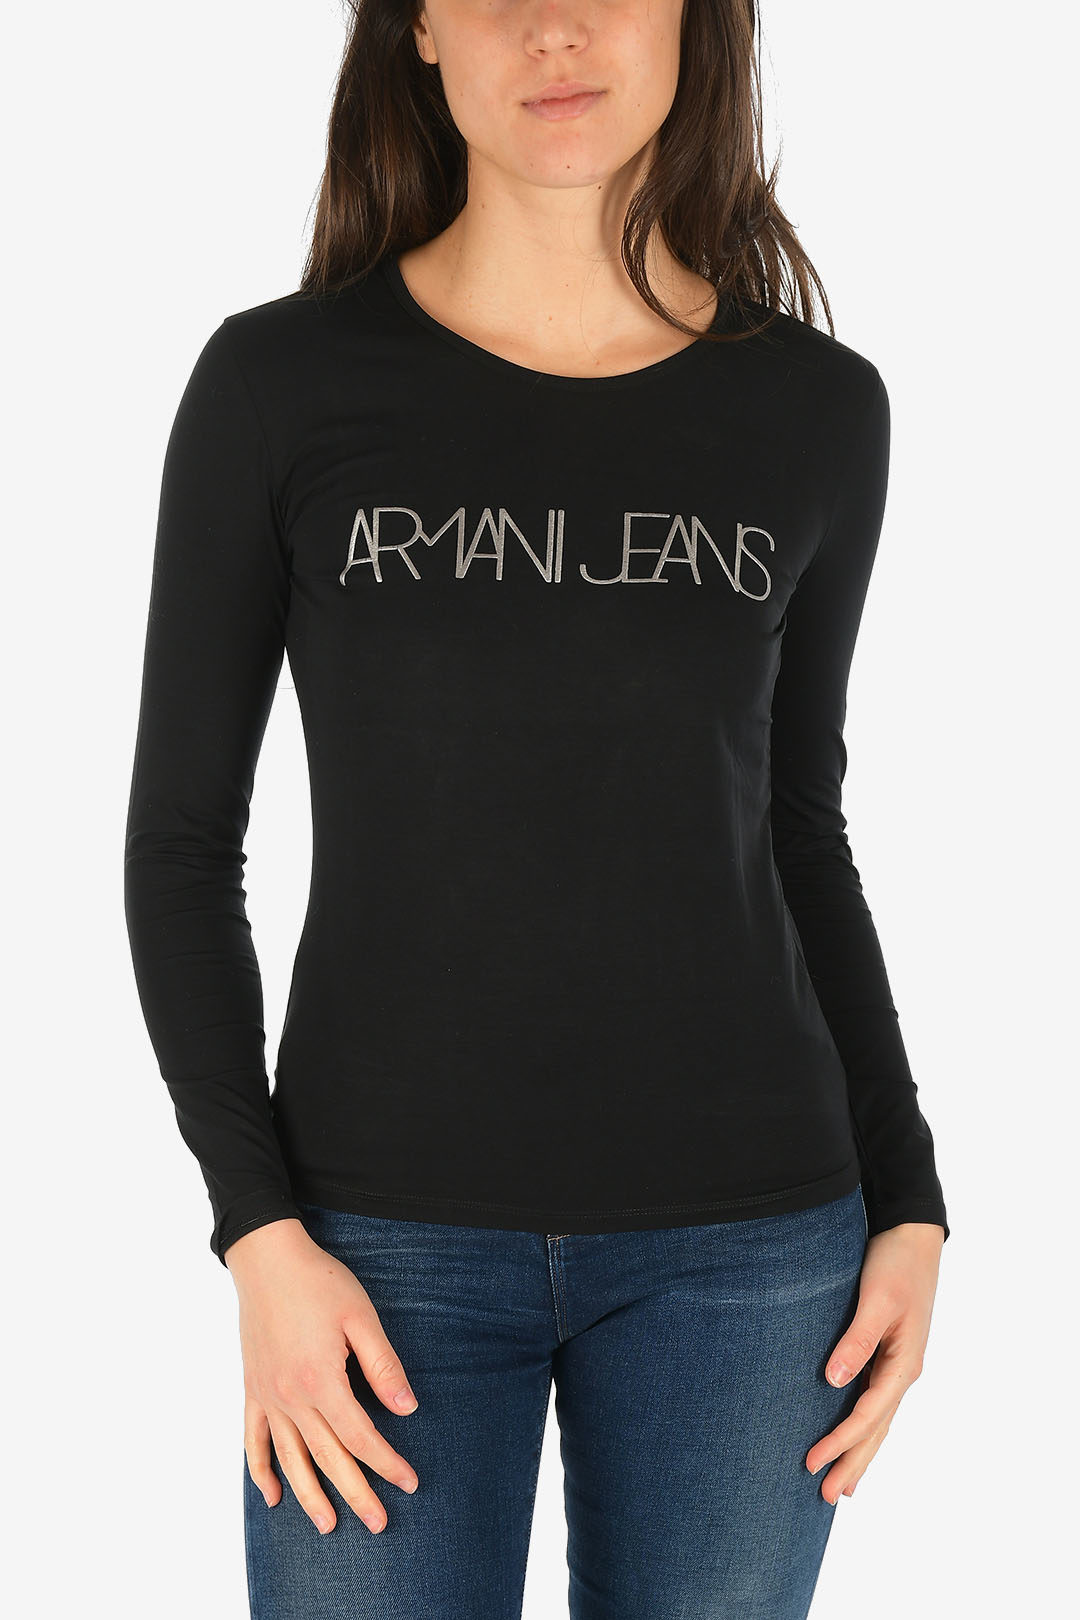 Armani JEANS Sleeve with Logo women - Outlet